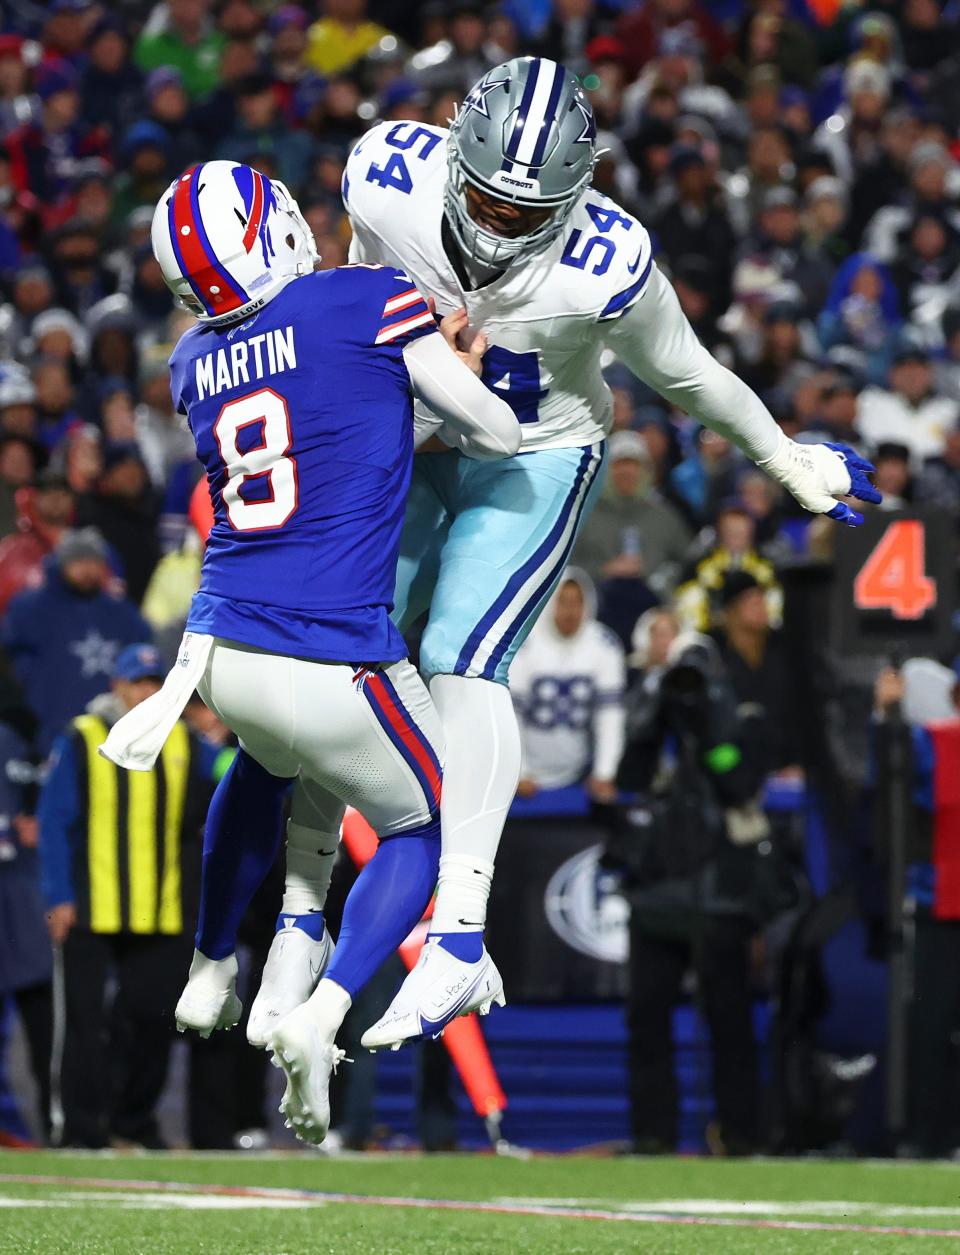 Buffalo Bills punter Sam Martin (8) is hit by Dallas Cowboys defensive end Sam Williams (54) while punting the ball during the second quarter of an NFL football game, Sunday, Dec. 17, 2023, in Orchard Park, N.Y. (AP Photo/Jeffrey T. Barnes)